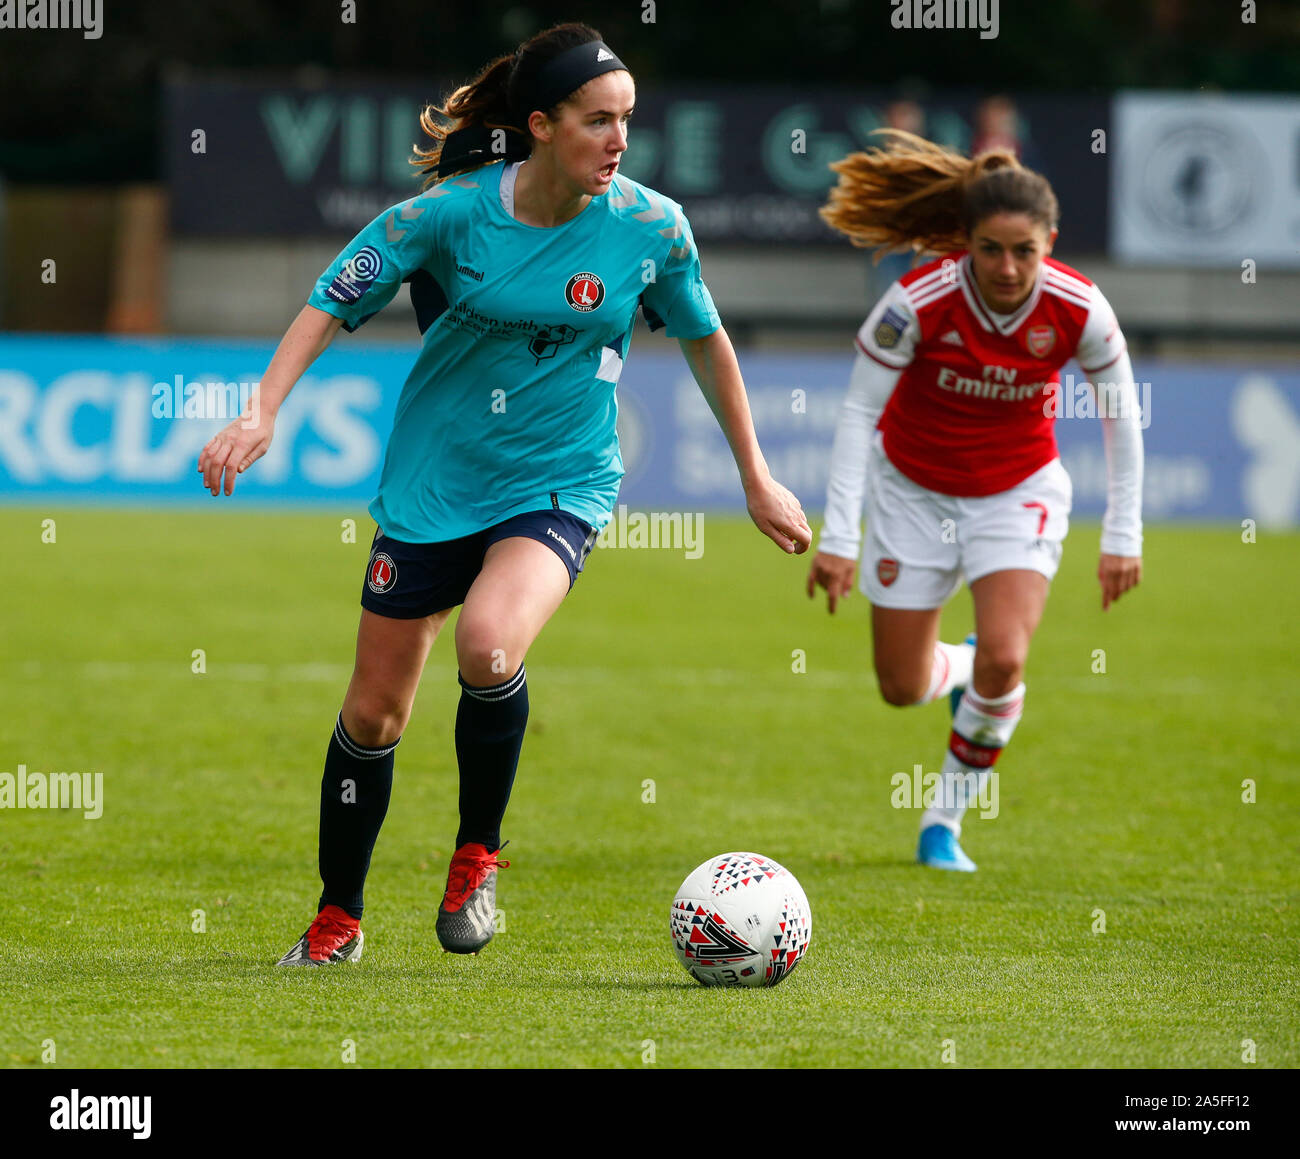 Boreham Wood, UK. 20th Oct, 2019. BOREHAMWOOD, ENGLAND - OCTOBER 20: during FA WSL Continental Tyres Cup Group One South match between Arsenal Women and Charlton Athletic Women at Meadow Park Stadium on September 20, 2019 in Borehamwood, England Credit: Action Foto Sport/Alamy Live News Stock Photo